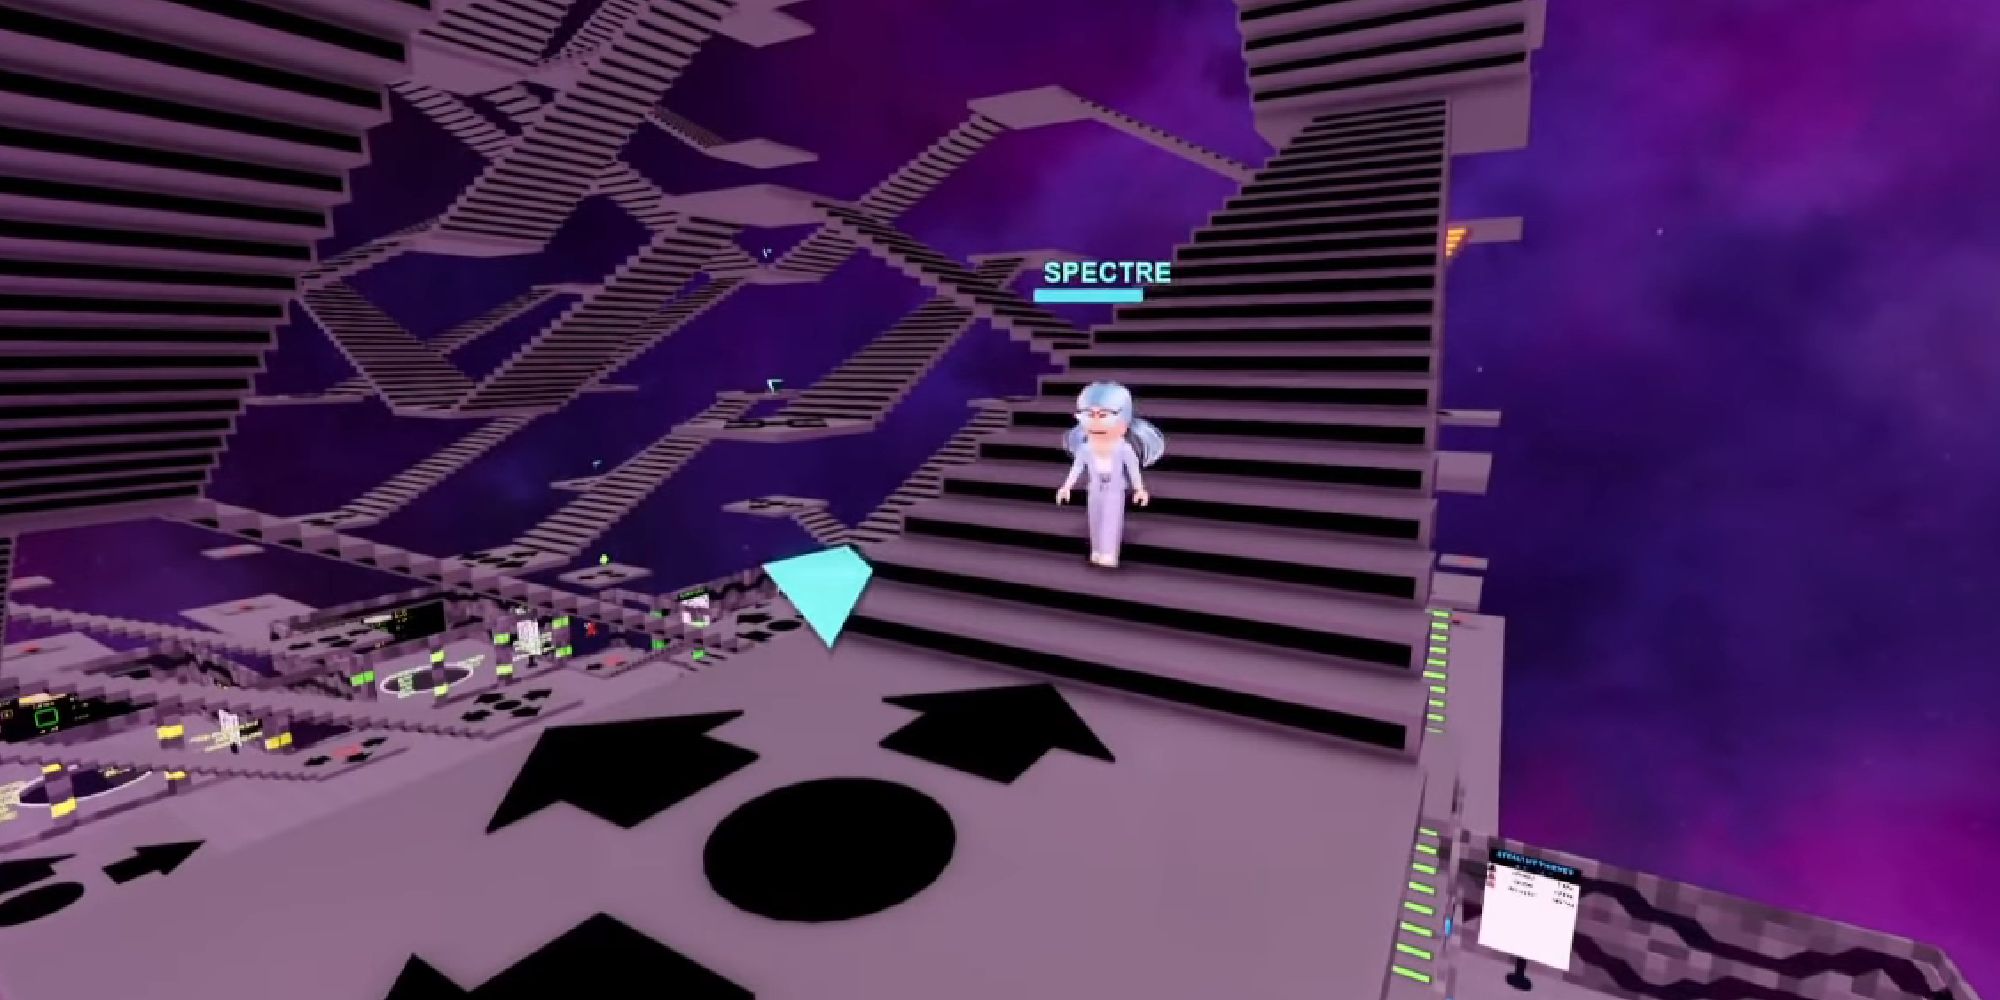 roblox stairs vr screenshot from trailer